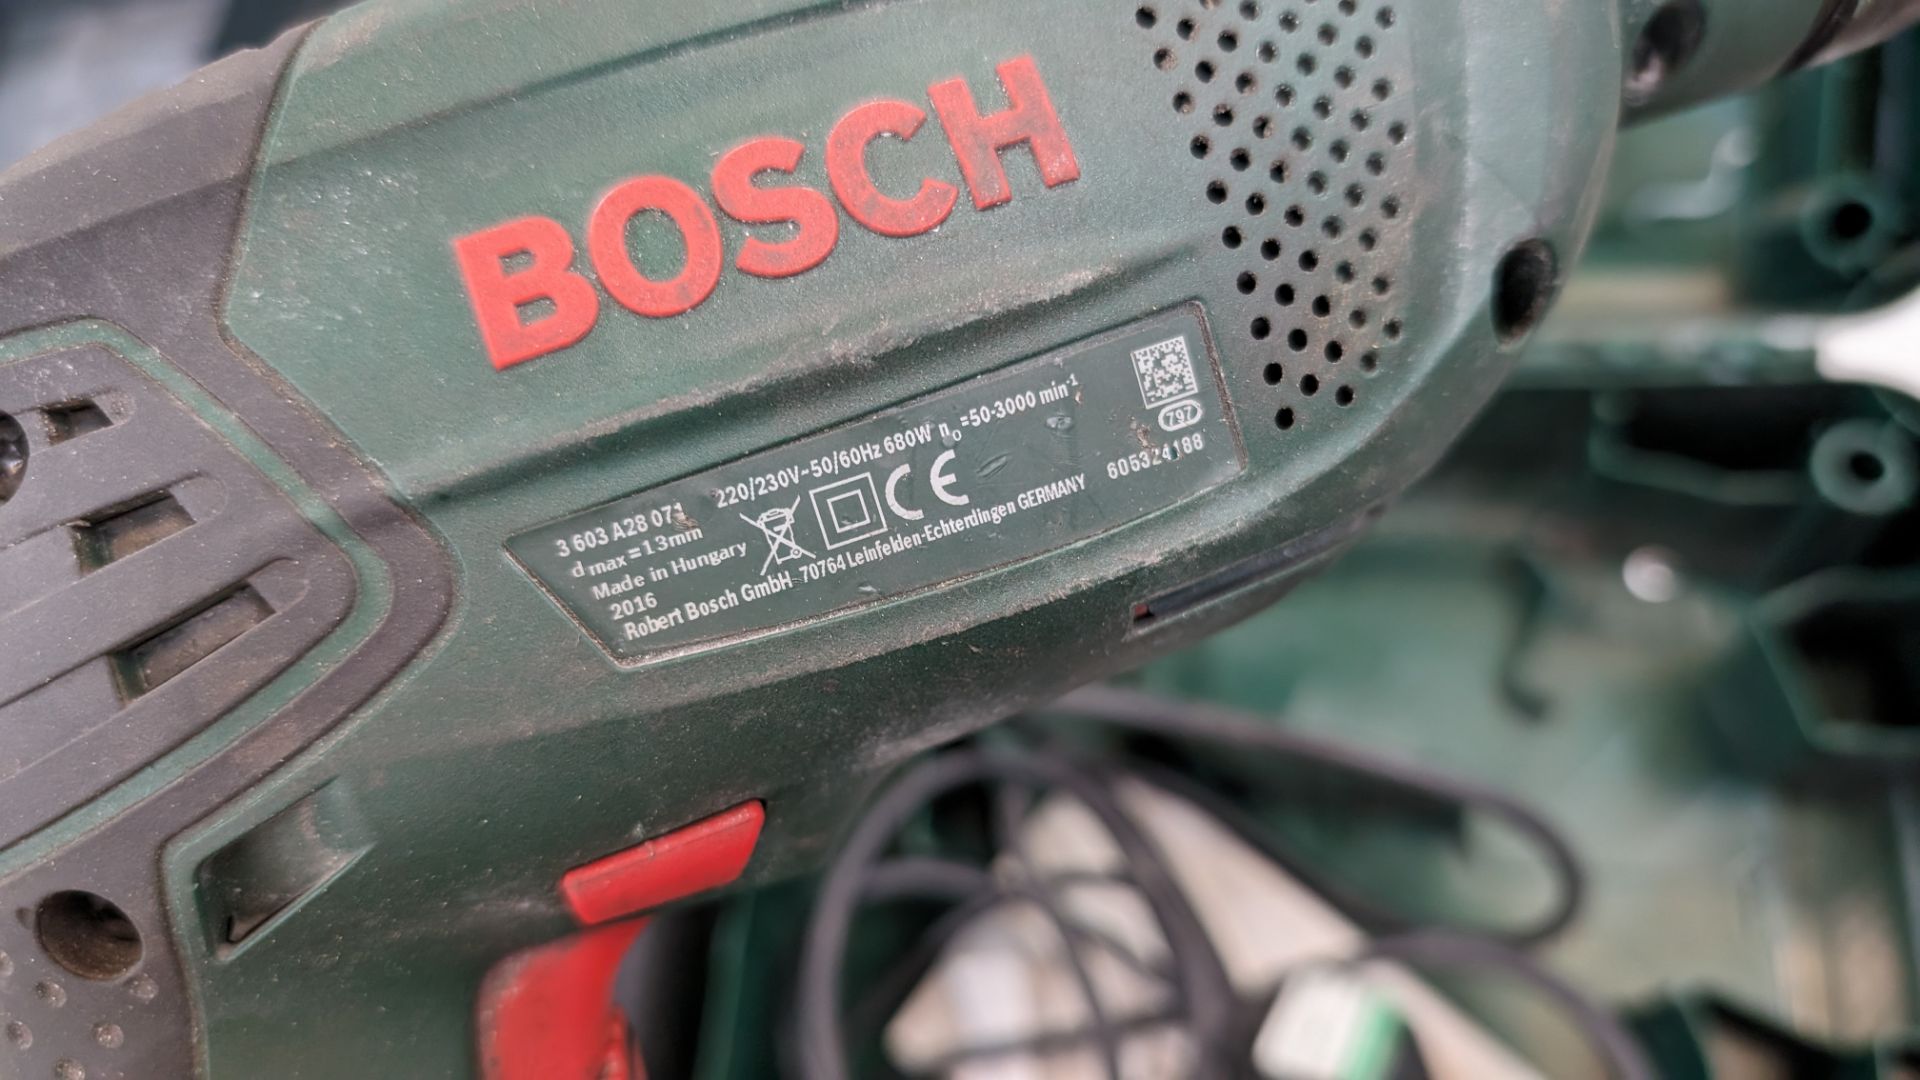 Bosch PSB680RE drill in case - Image 4 of 5